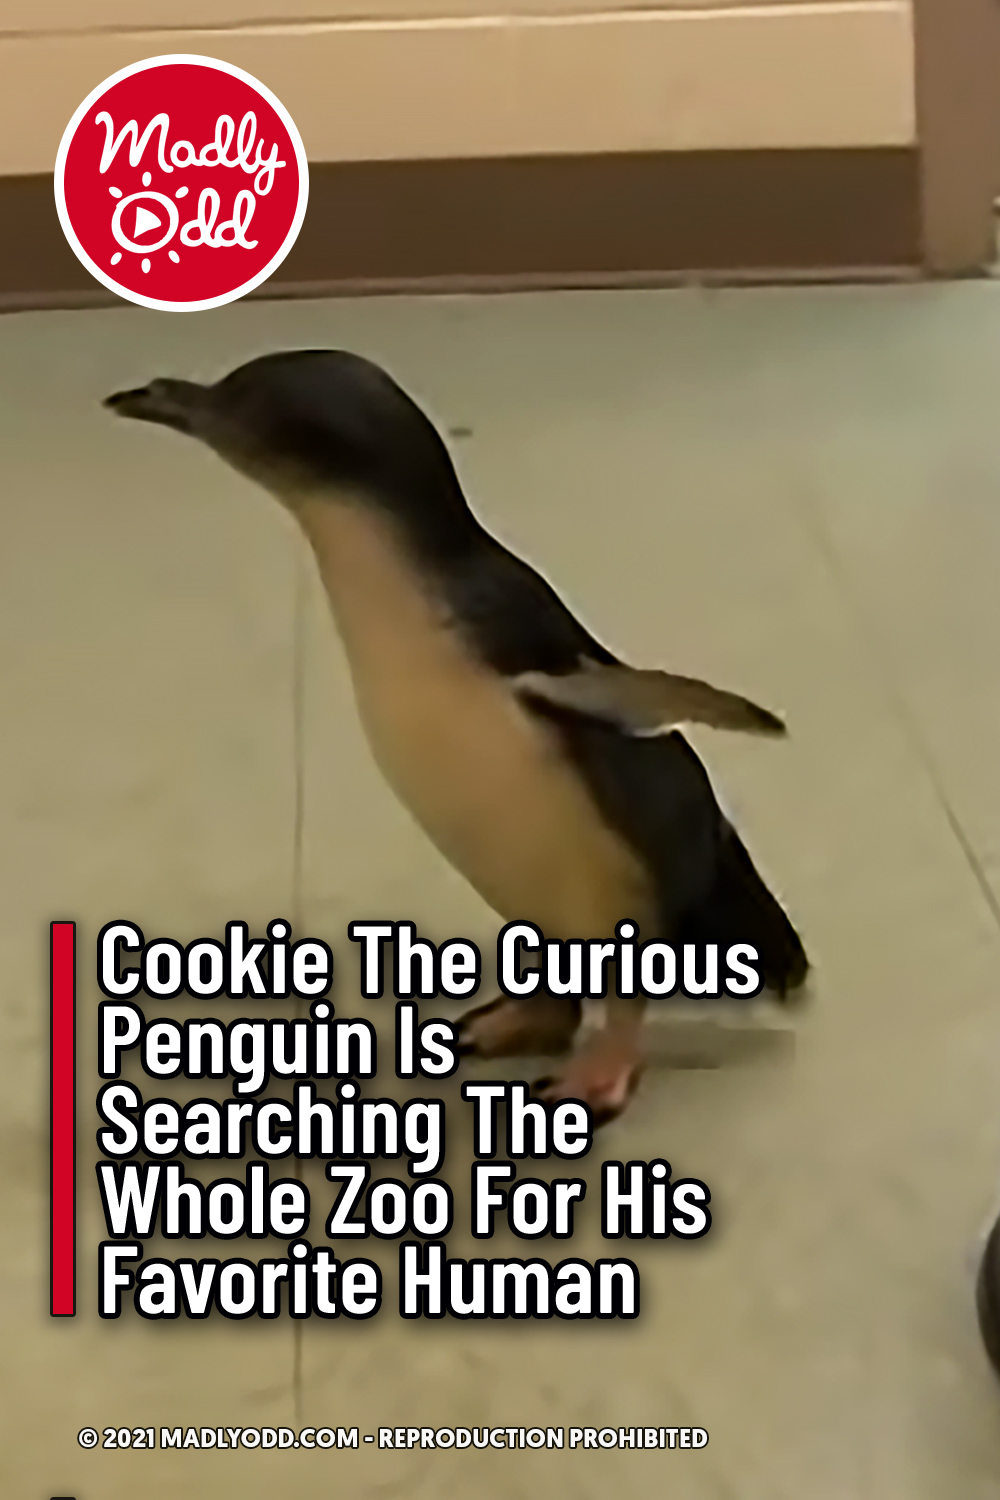 Cookie The Curious Penguin Is Searching The Whole Zoo For His Favorite Human